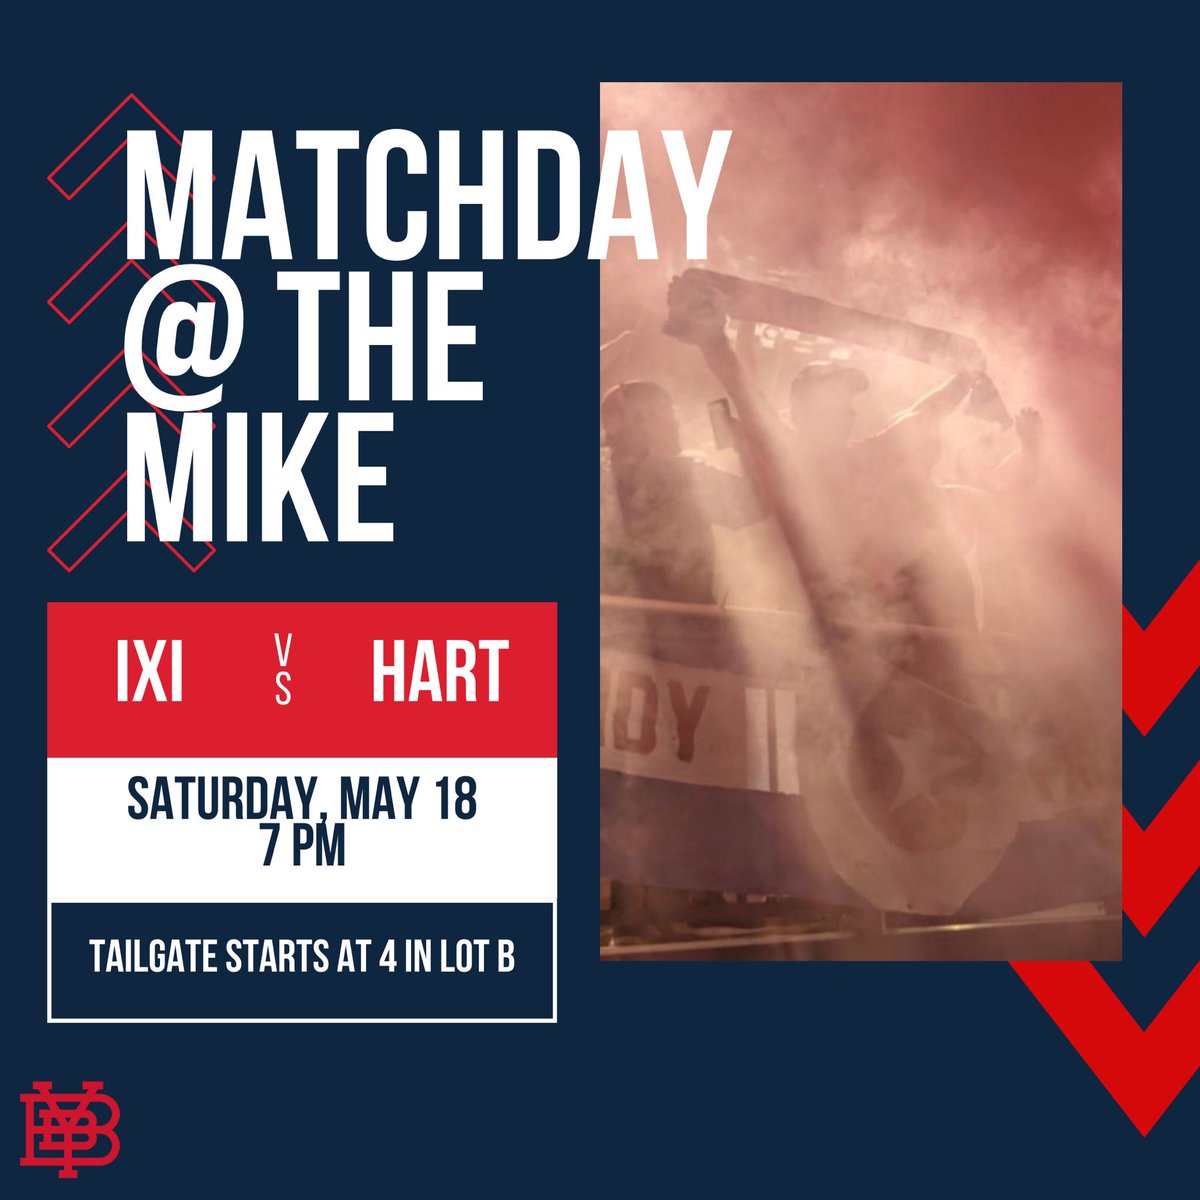 The Boys in Blue have won four straight in all competitions. What’s gonna happen this weekend? We sure as hell don’t know but we will be cheering our asses off for three more points! Join us at the Mike tomorrow! #XITID